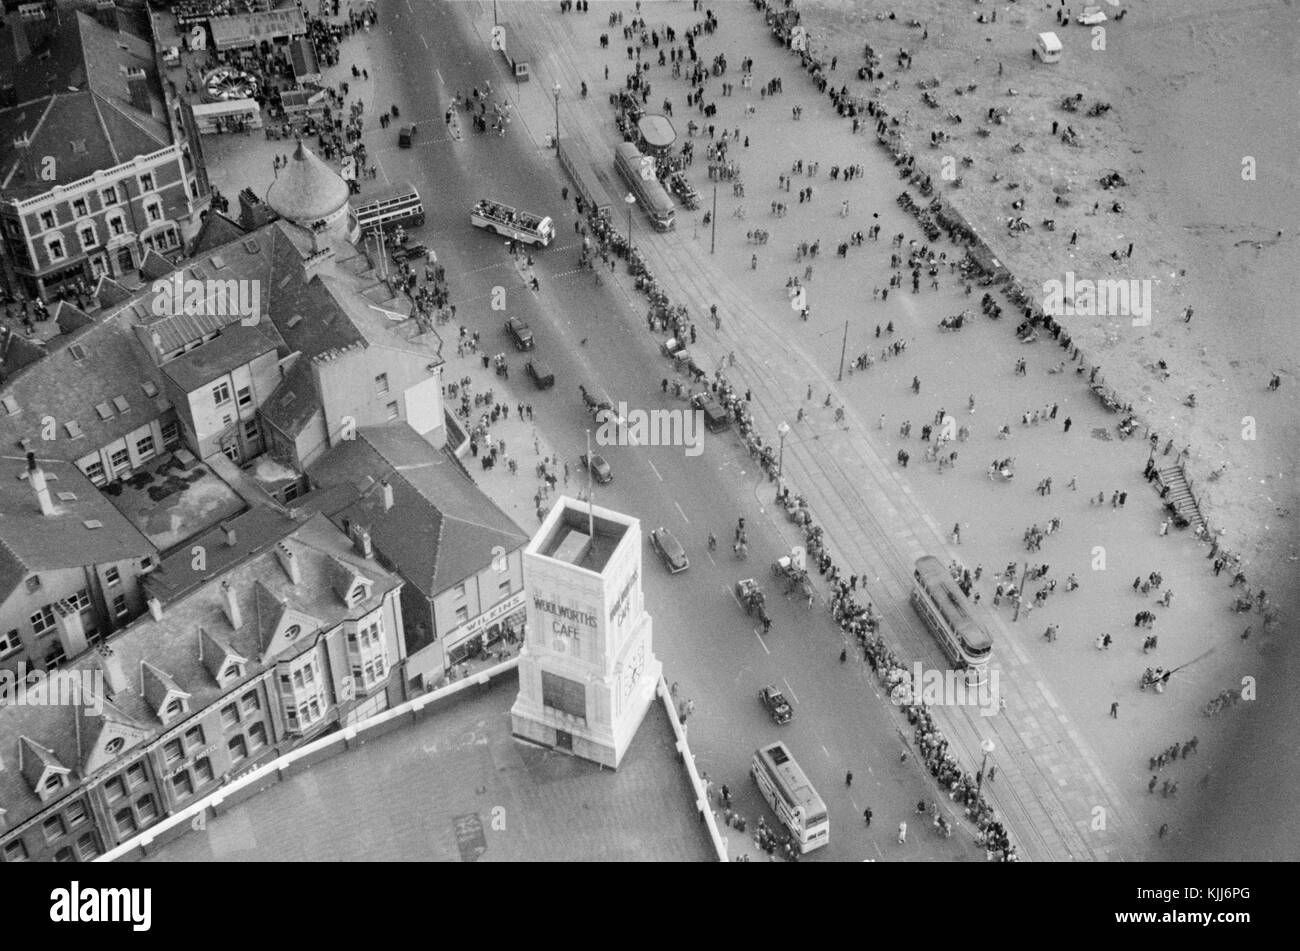 1940s view from the top of the Blackpool Tower in England.Blackpool Tower is a tourist attraction in Blackpool, Lancashire, England, which was opened to the public on 14 May 1894. Inspired by the Eiffel Tower in Paris, it is 518 feet (158 metres) tall and is the 120th tallest freestanding tower in the world. Blackpool Tower is also the common name for Tower buildings, an entertainment complex in a red-brick three-storey block comprising the tower, the ground floor aquarium and cafeteria, Tower Circus, the Tower Ballroom and roof gardens that was designated a Grade I listed building in 1973. Stock Photo